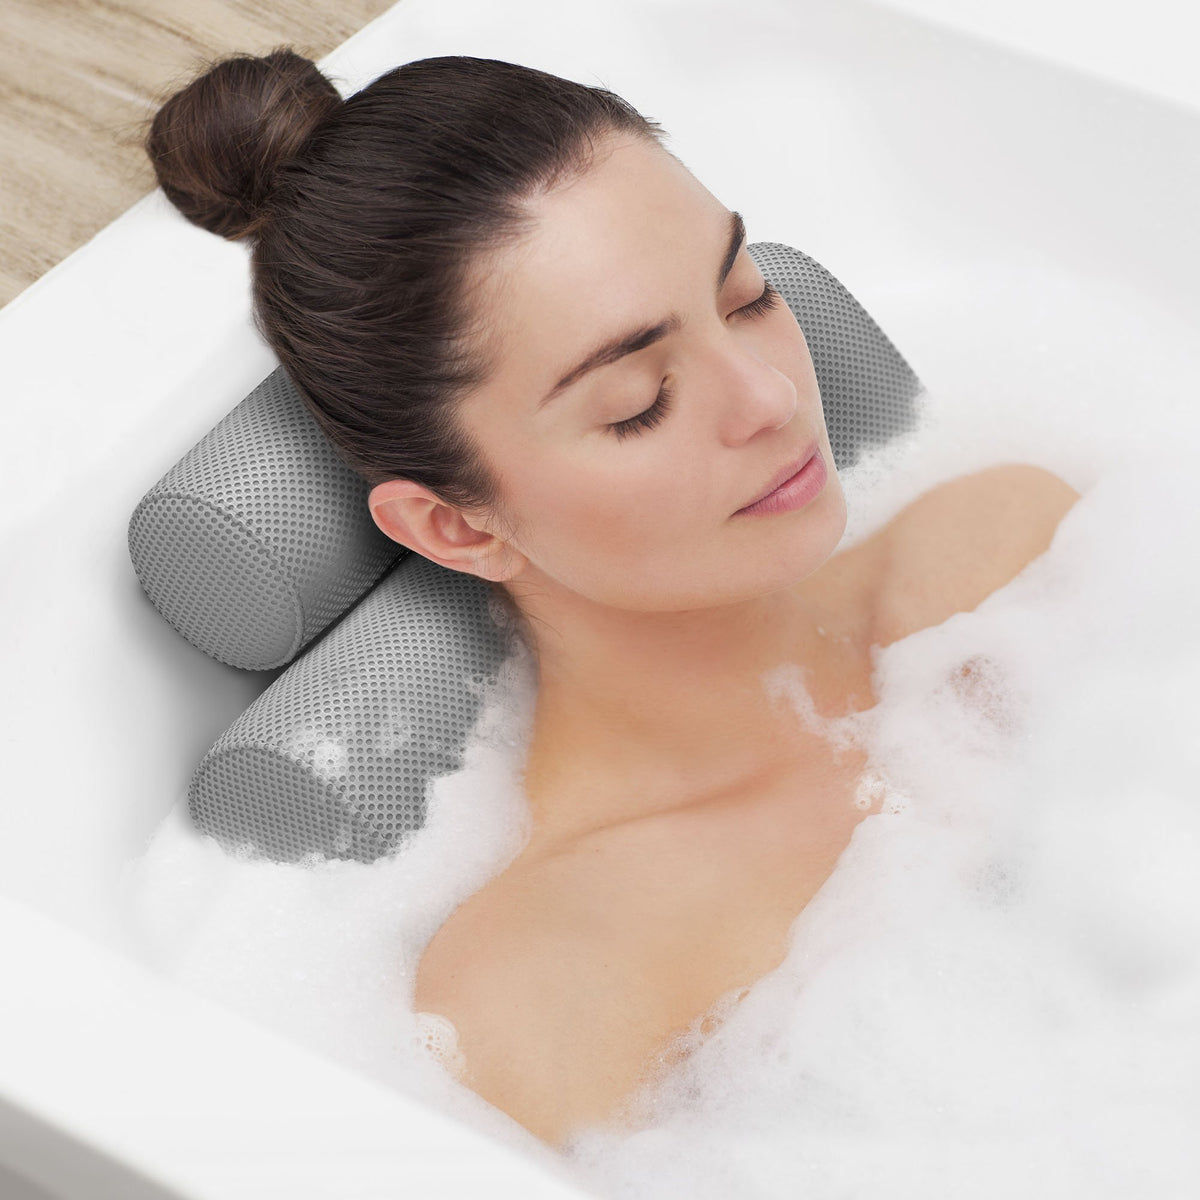 Luxury Non-Slip Spa Bathtub Pillow with 6 Suction Cups, 3D Mesh Spa Bath  Pillow Home Spa Tub Pillow Bath Cushion for Head, Neck, Back and Shoulders  